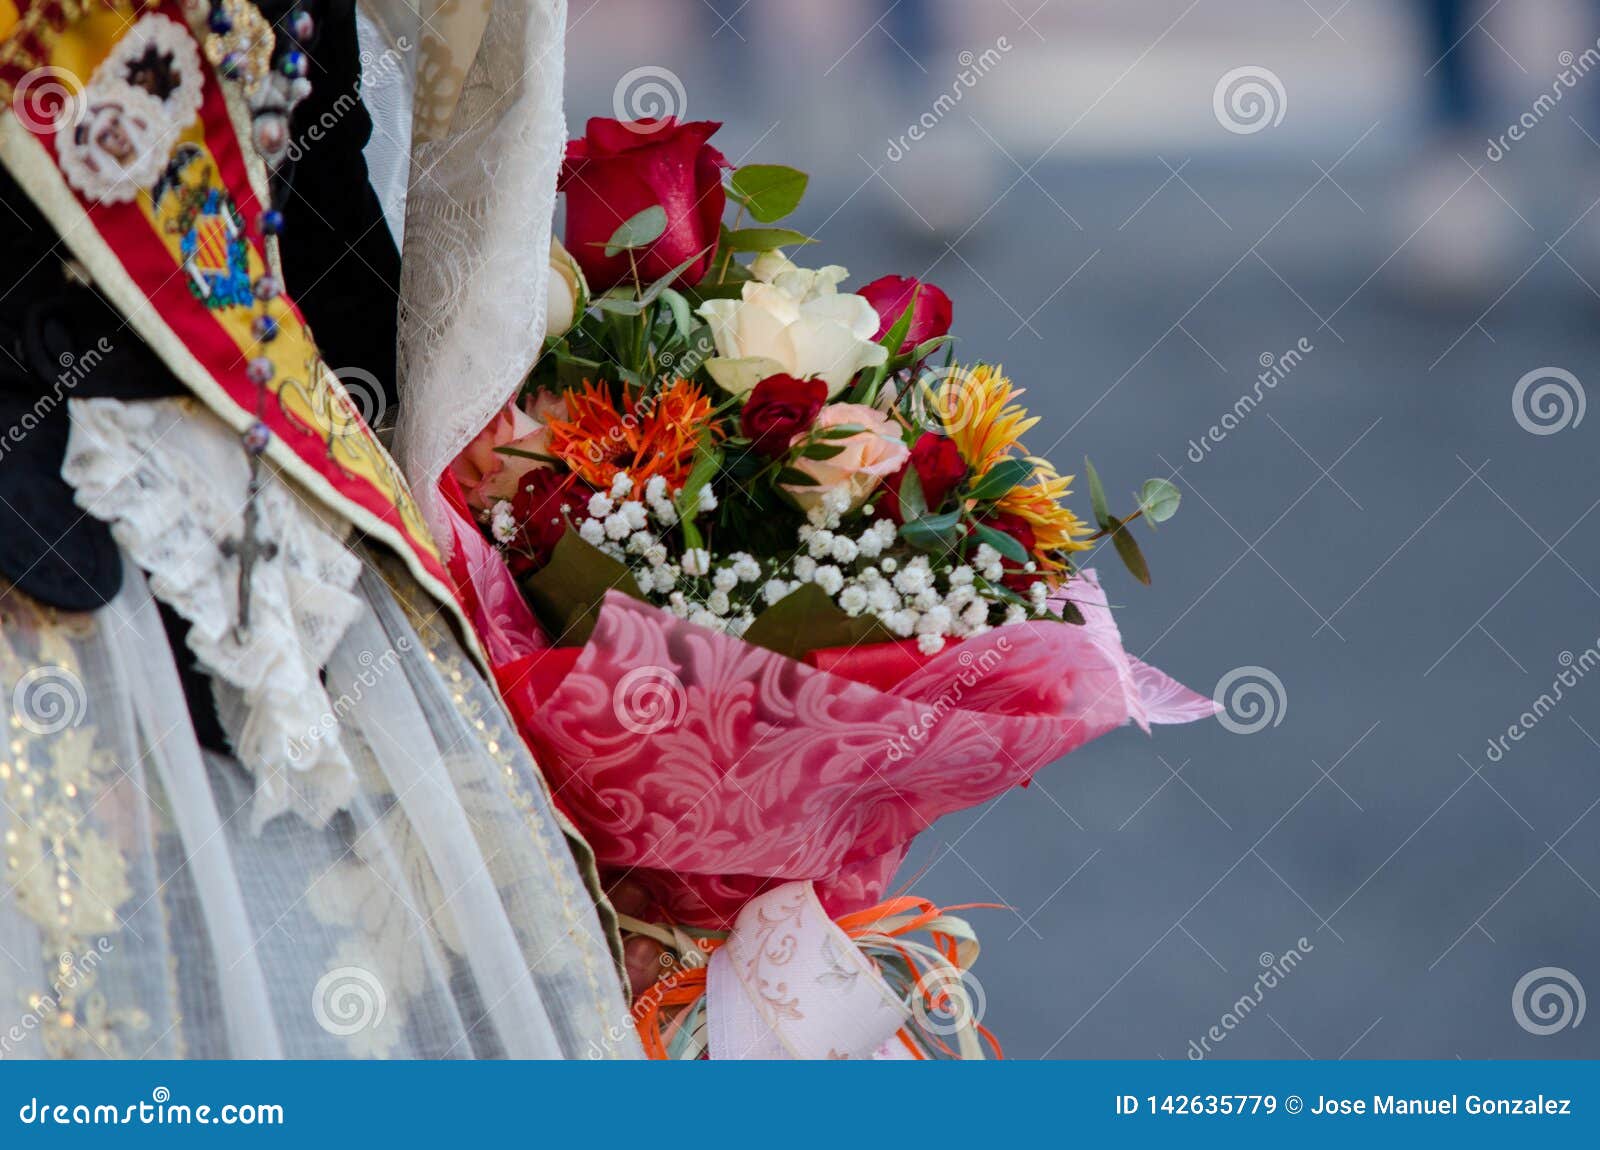 flowers for the virgin in the offering of the fallas of valencia